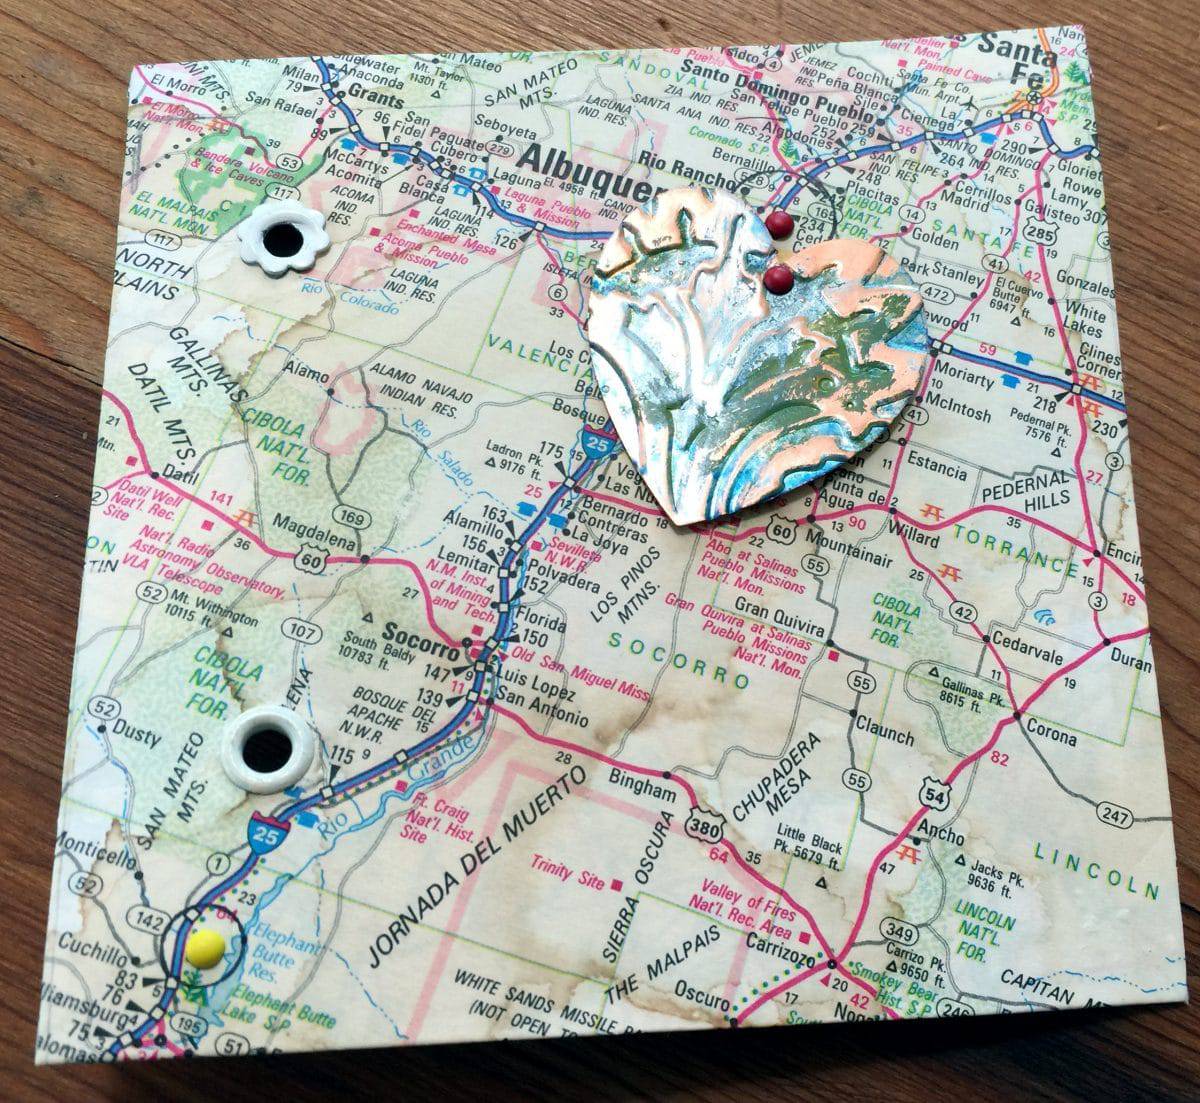 This map card illustrates the mixed media project of the month for Mary Ellen Beads Albuquerque and the Collaborheartists.